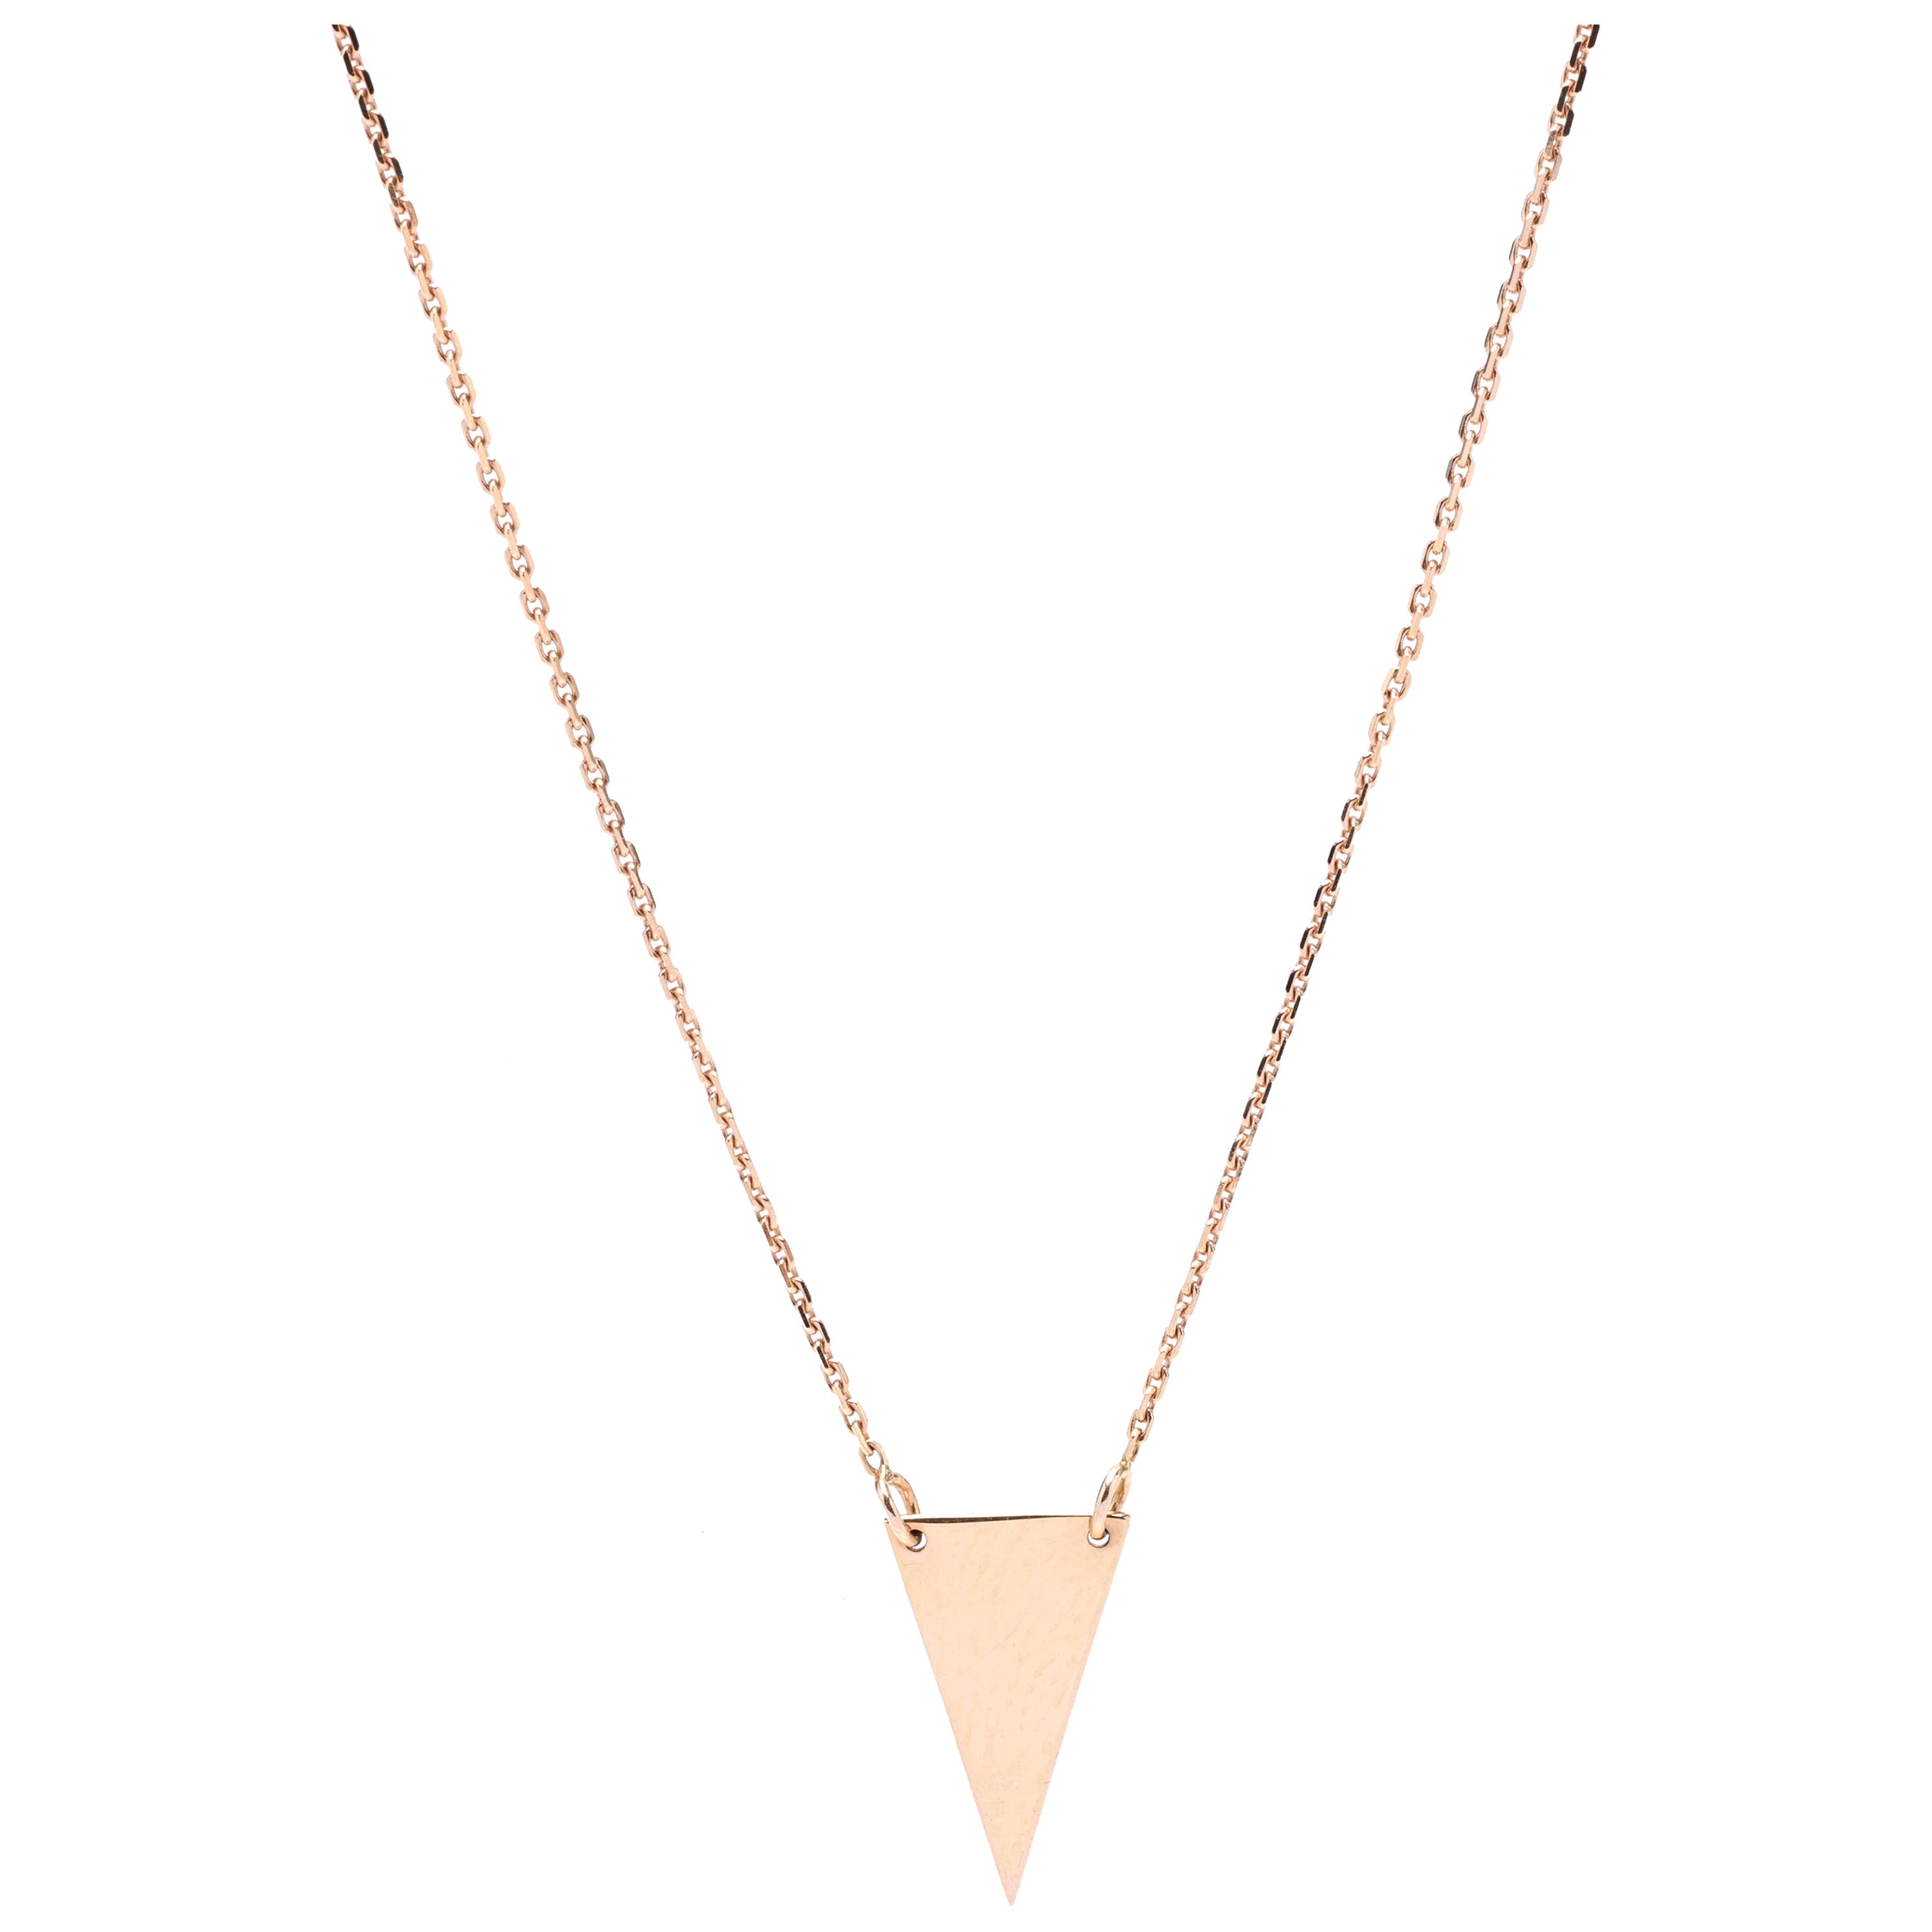 14K Rose Gold Triangle Necklace, Length 16-18 Inches, Pendant Necklace For Sale